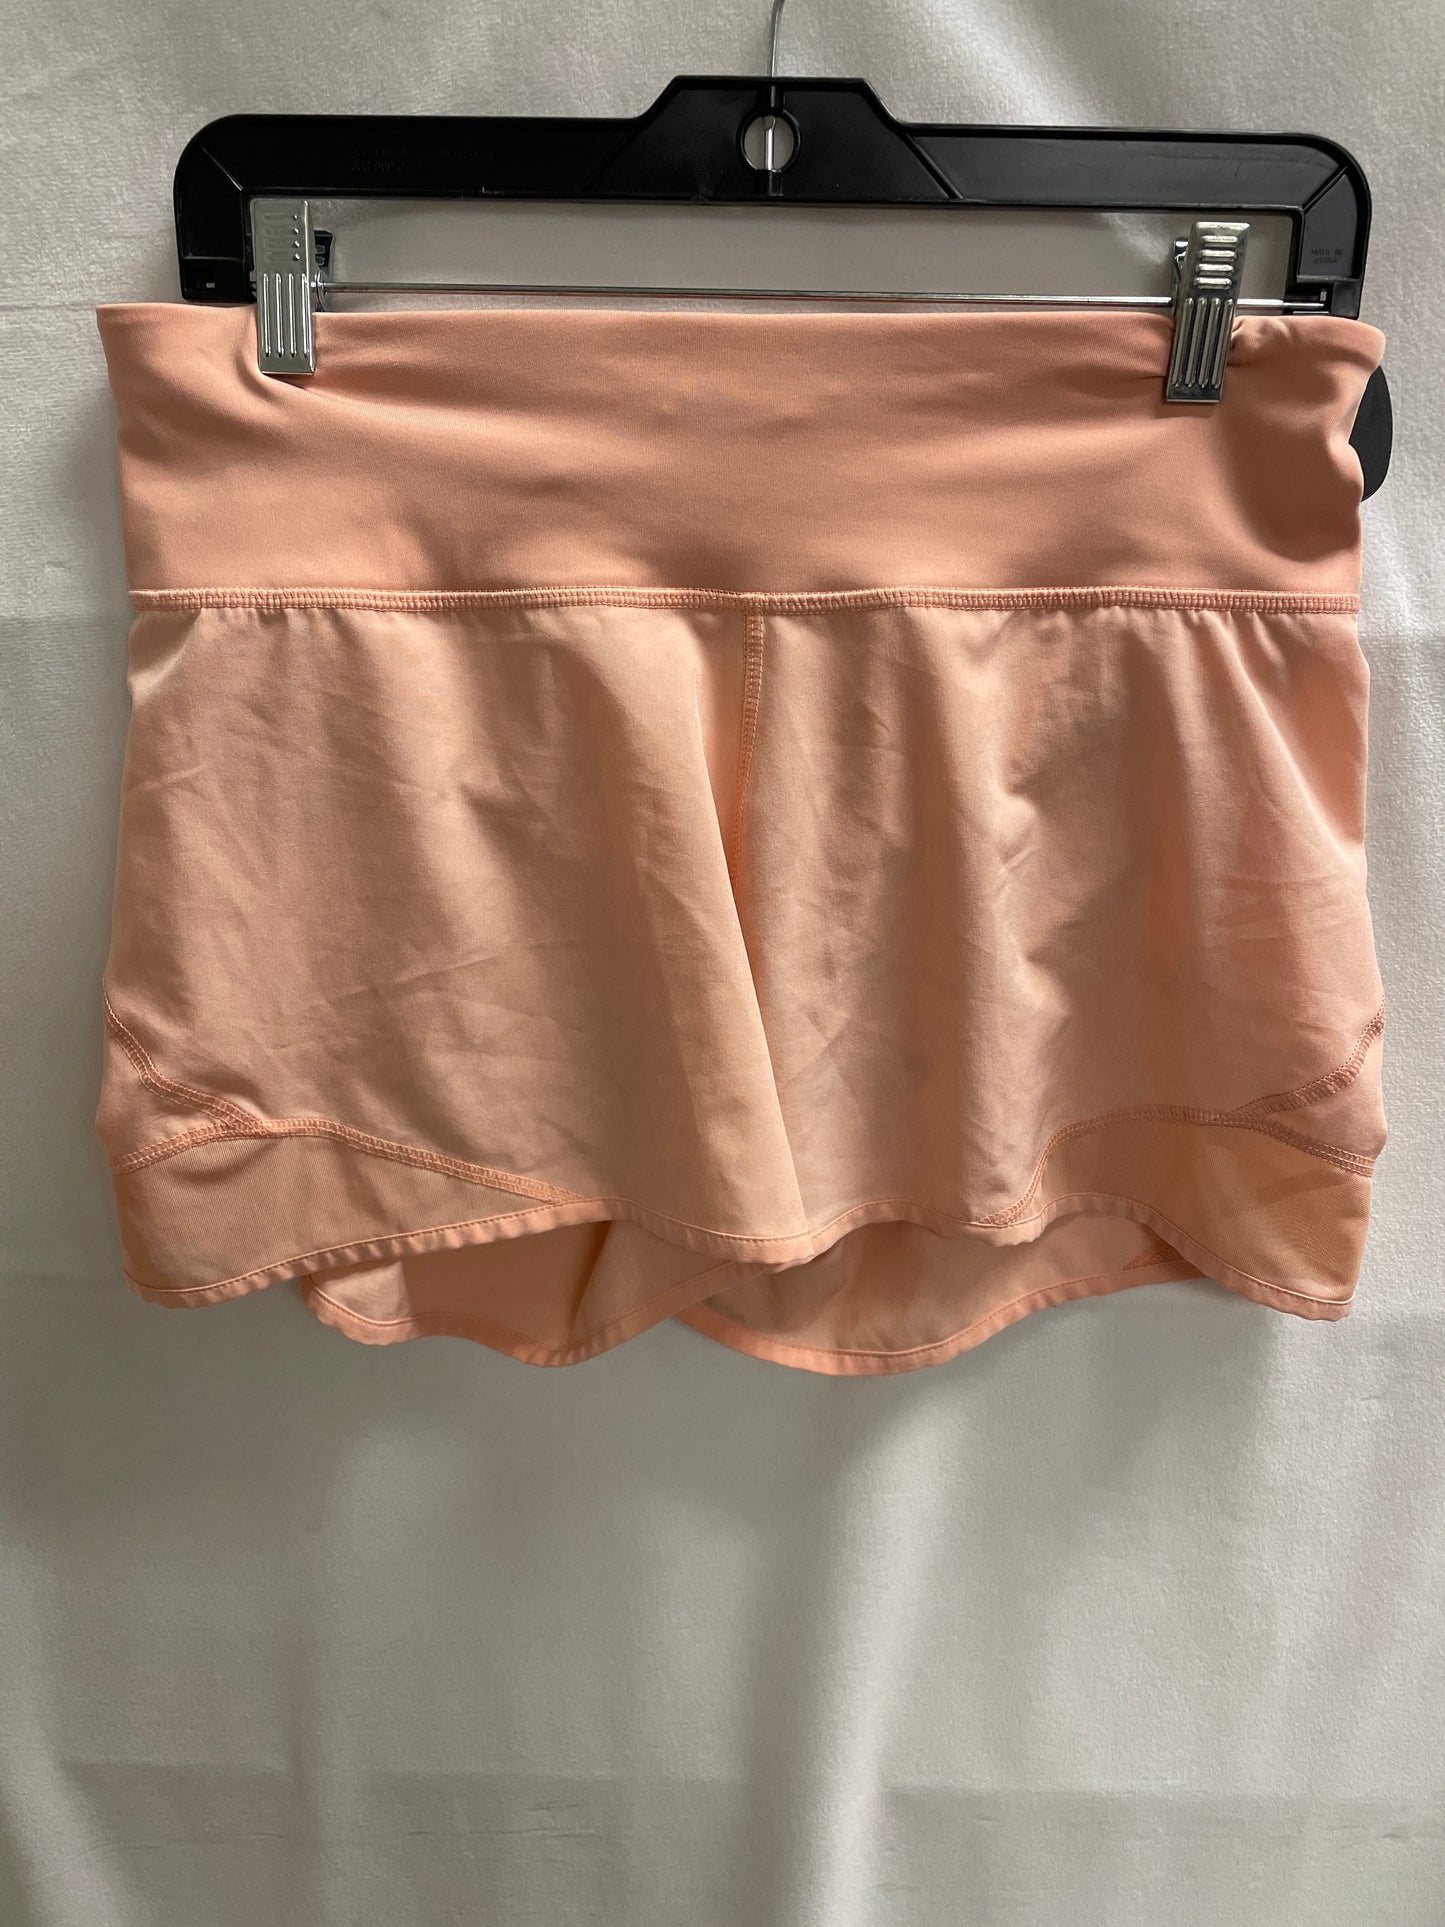 Athletic Shorts By Old Navy  Size: S